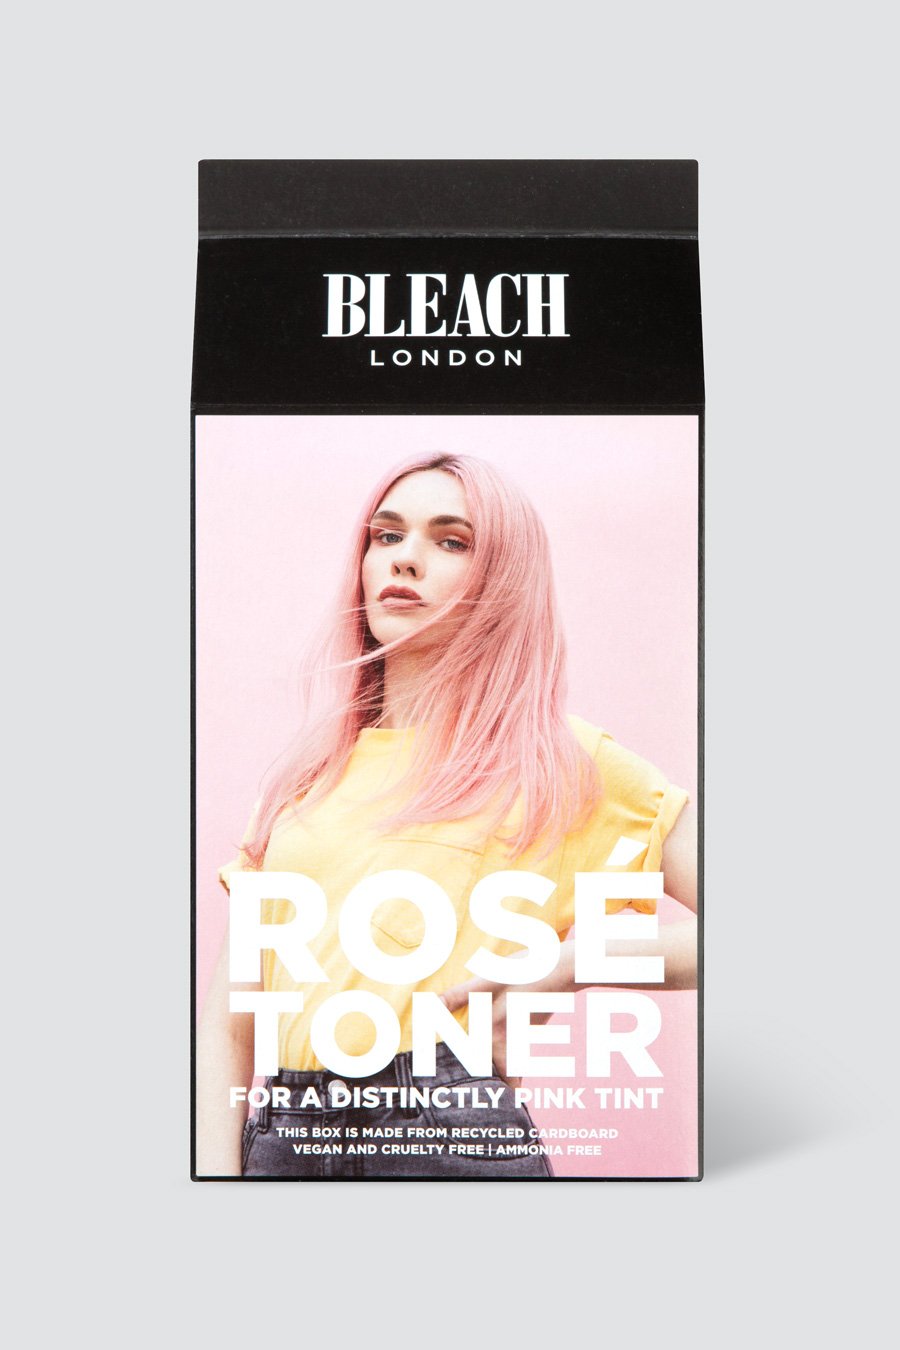 Bleach London Rose Toner Kit for a Distinctly Pink Tint